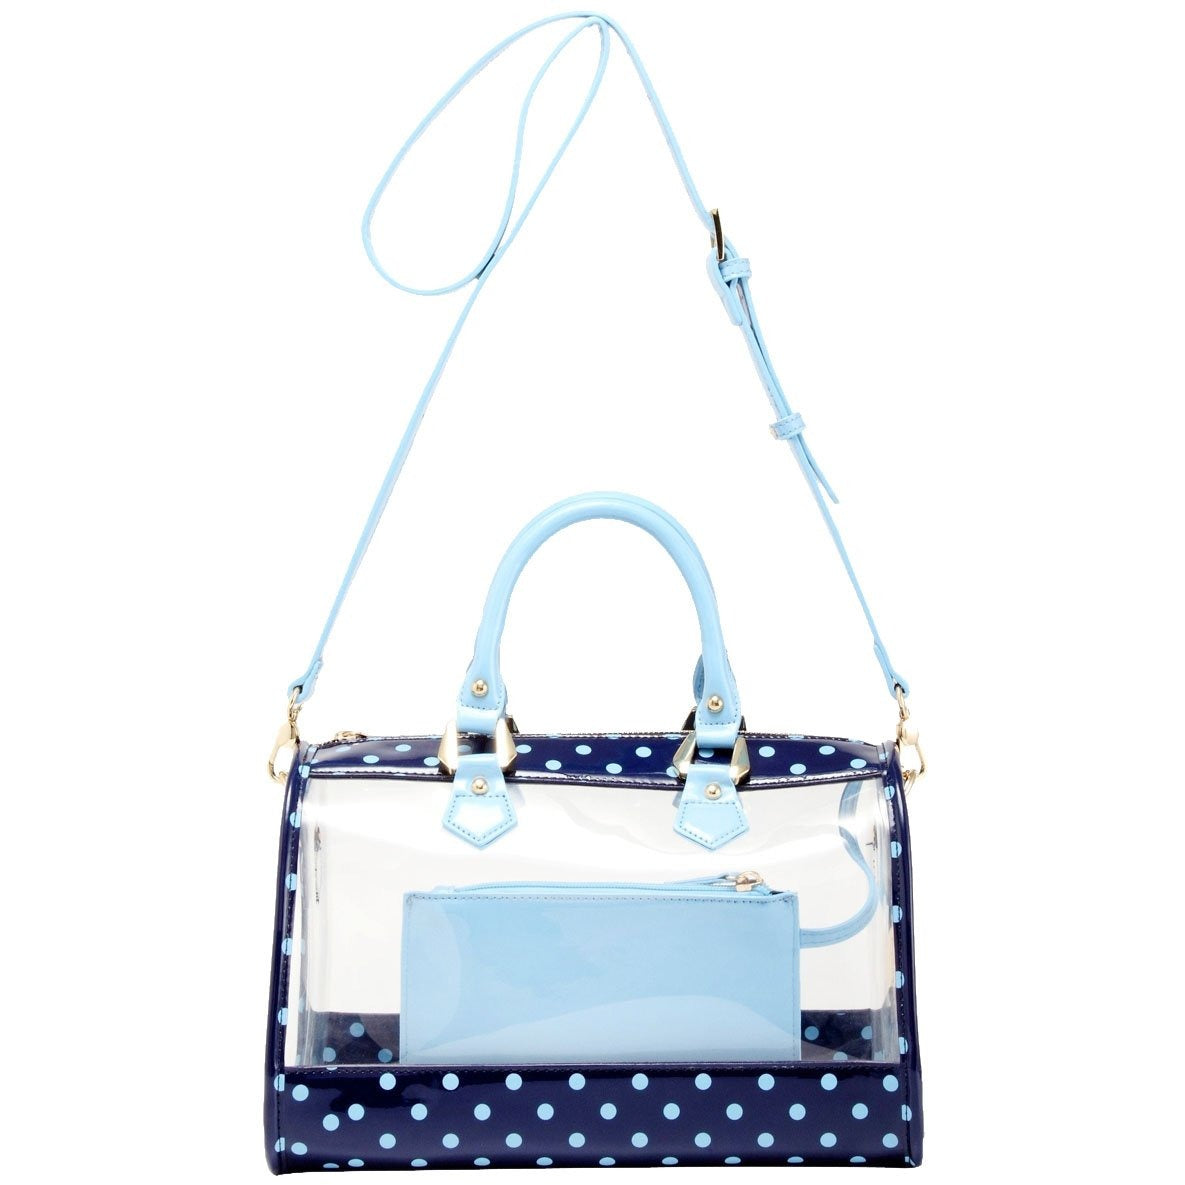 Sky Blue Designer Crossbody Bag For Women Light Luxury Square Handbag With  Chain Strap, High Quality Shoulder Wallet And Fashionable Leather Crossbody  Purse From Gimmegimme, $69.24 | DHgate.Com